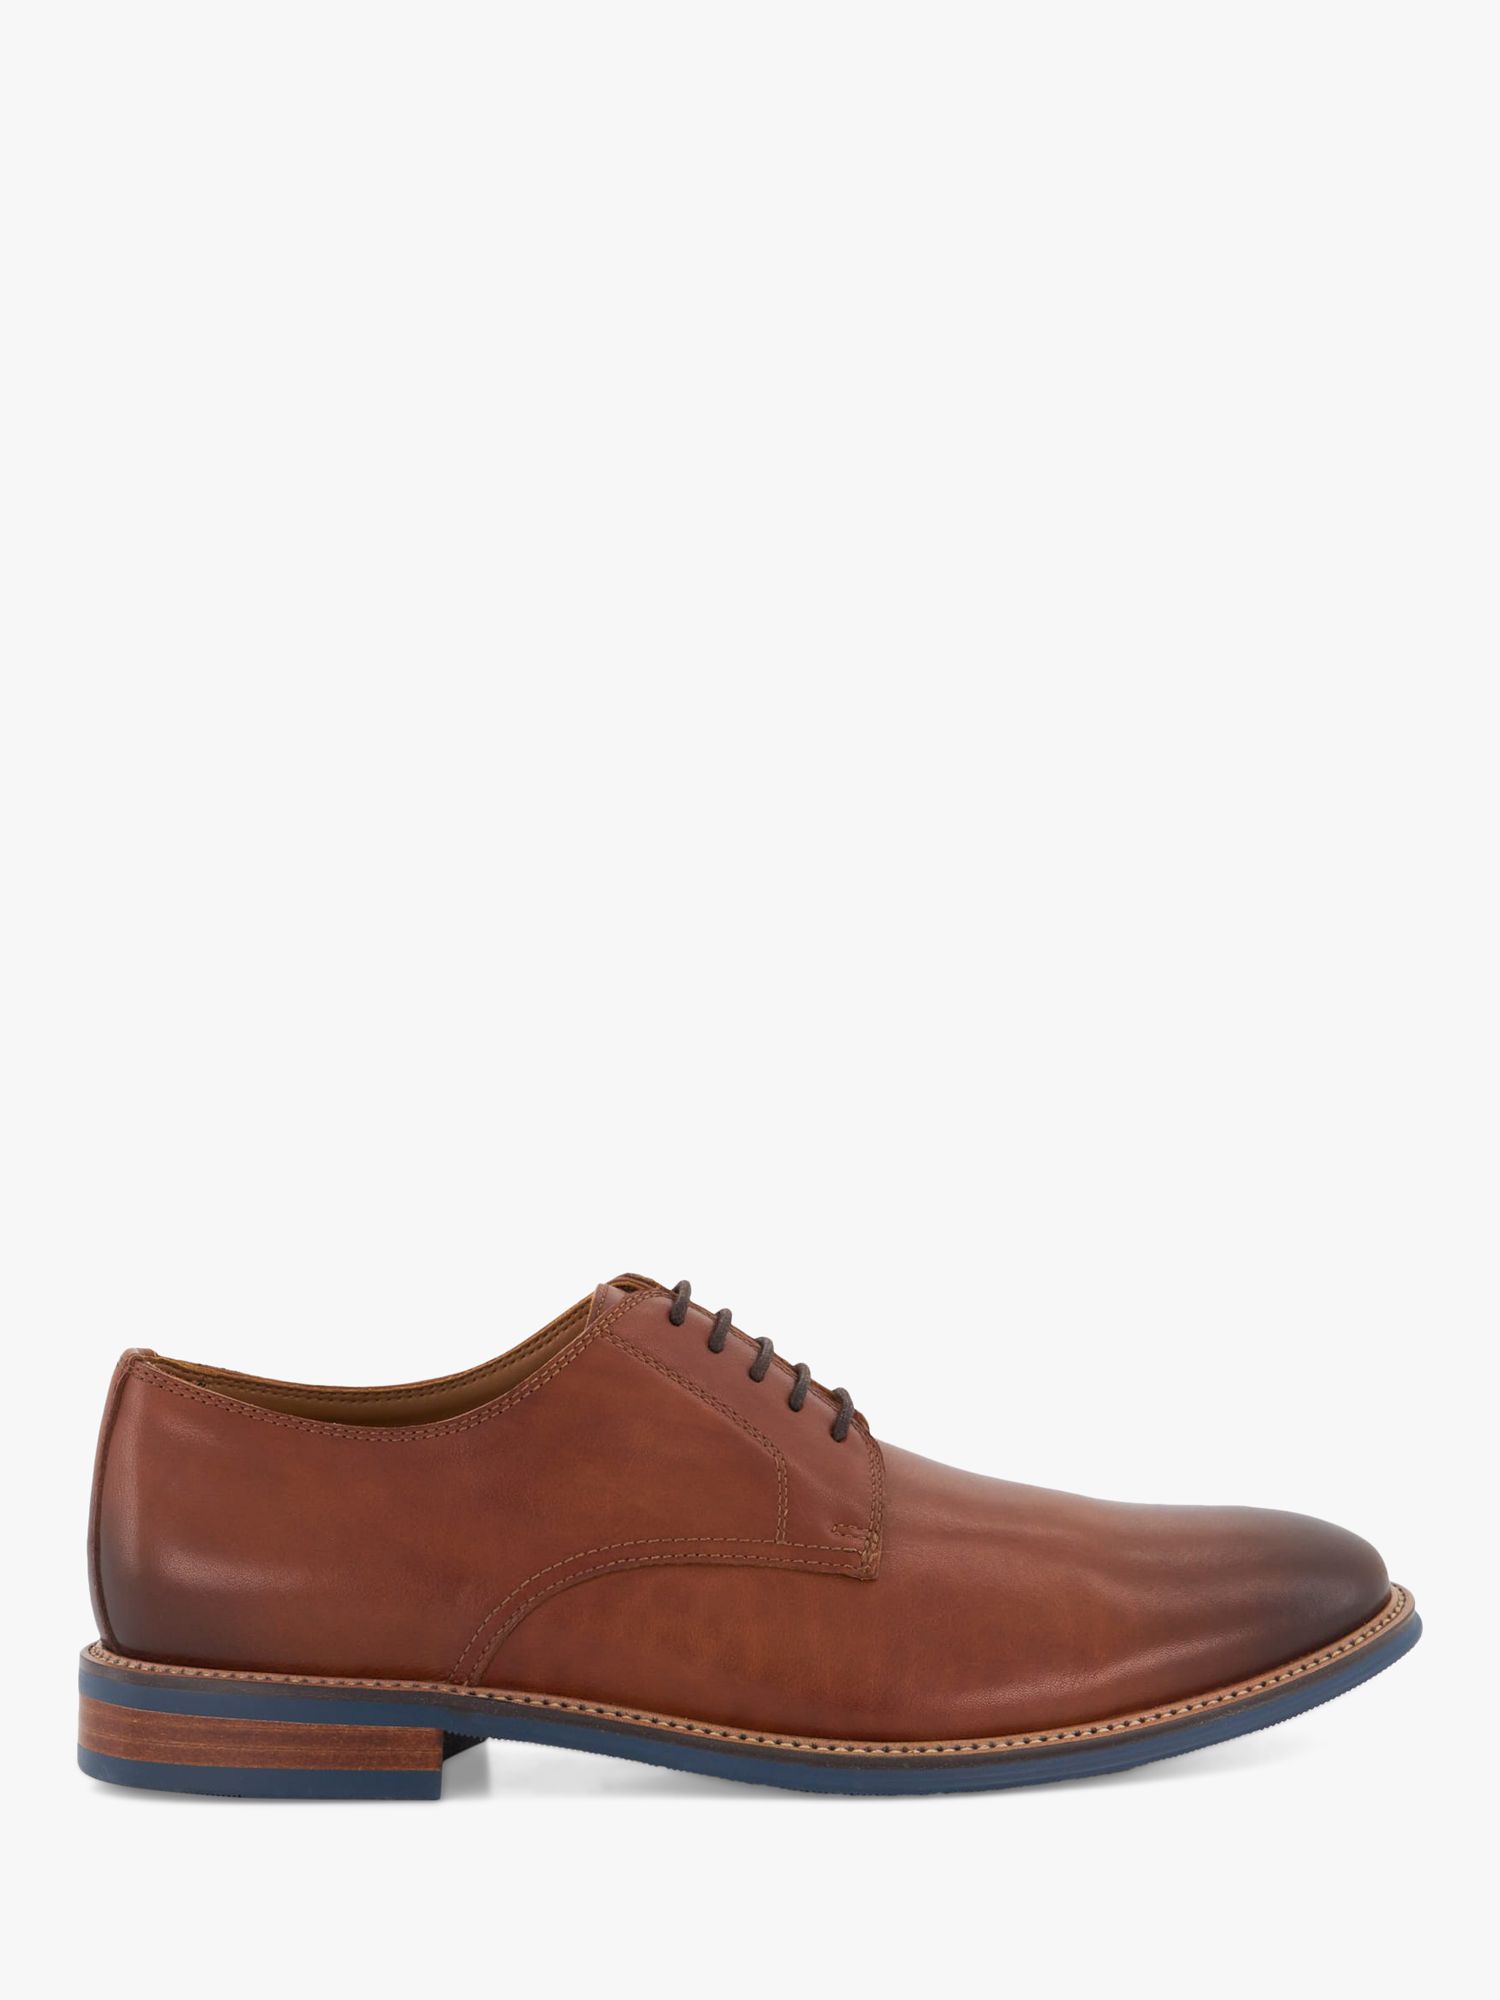 Dune Stanley Leather Derby Shoes, Tan-leather, EU43